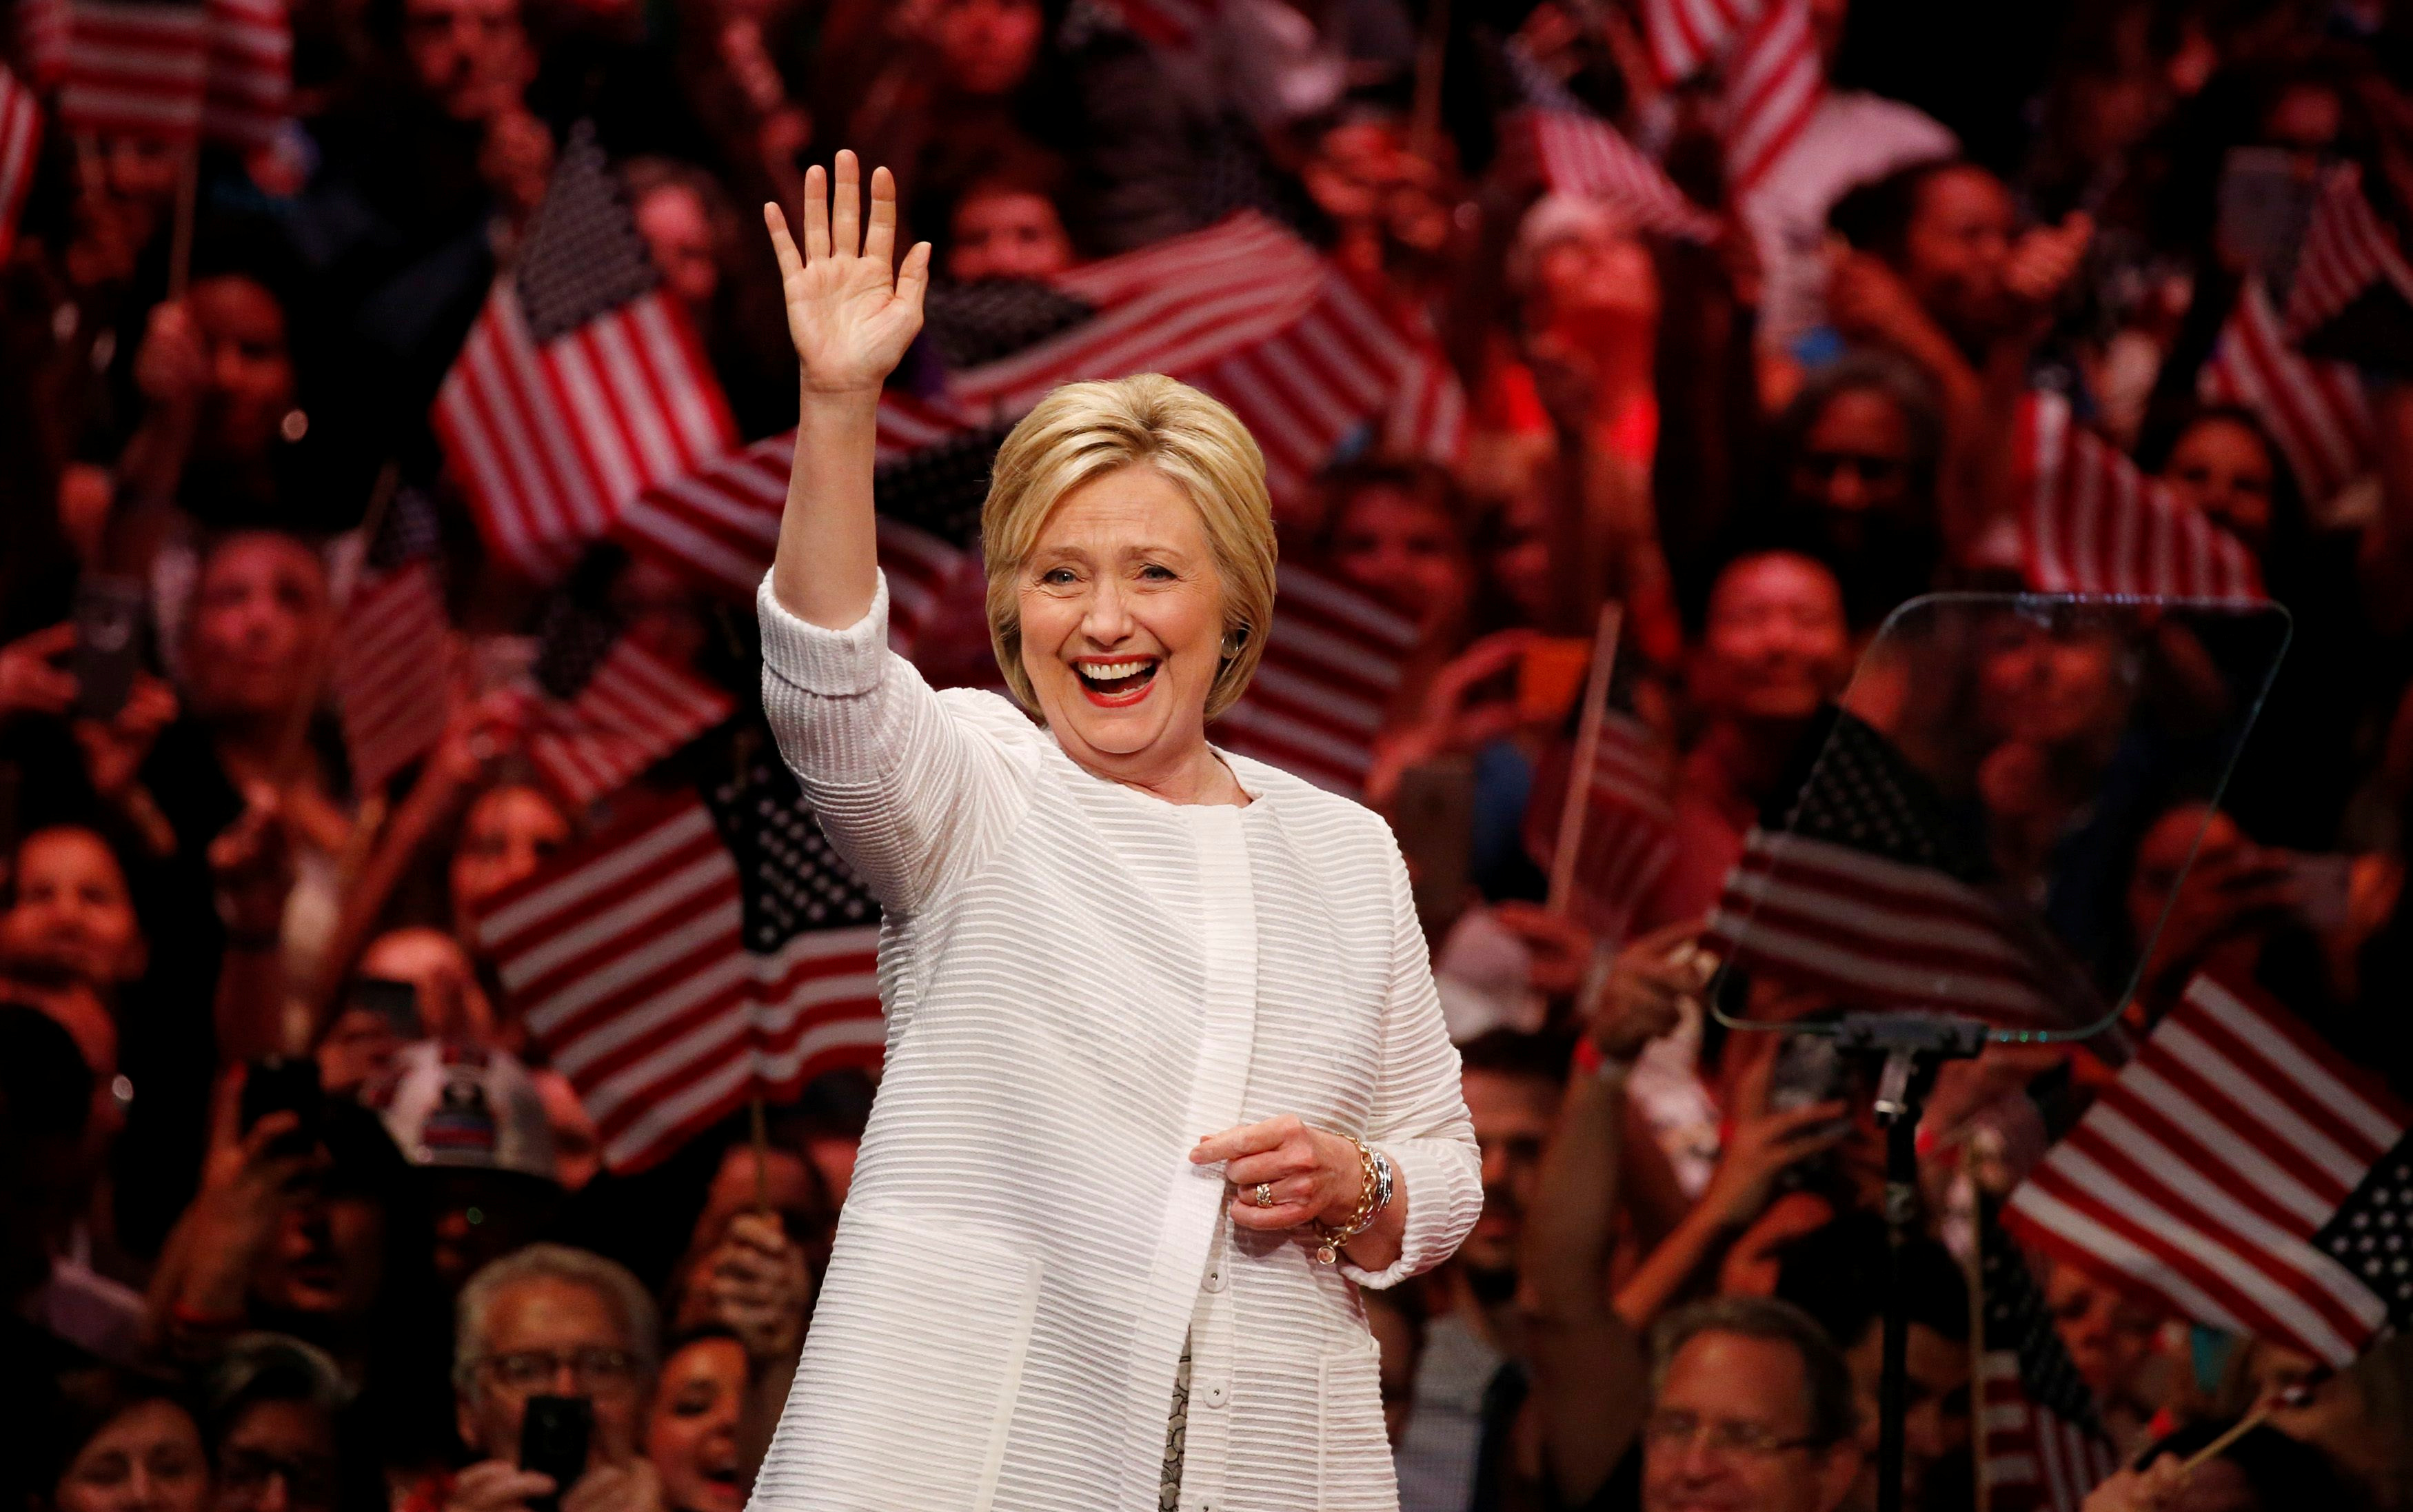 Democratic presidential candidate Hillary Clinton waves as she arrives to speak during her California primary night rally held in the Brooklyn borough of New York, June 7, 2016. (Lucas Jackson—Reuters)